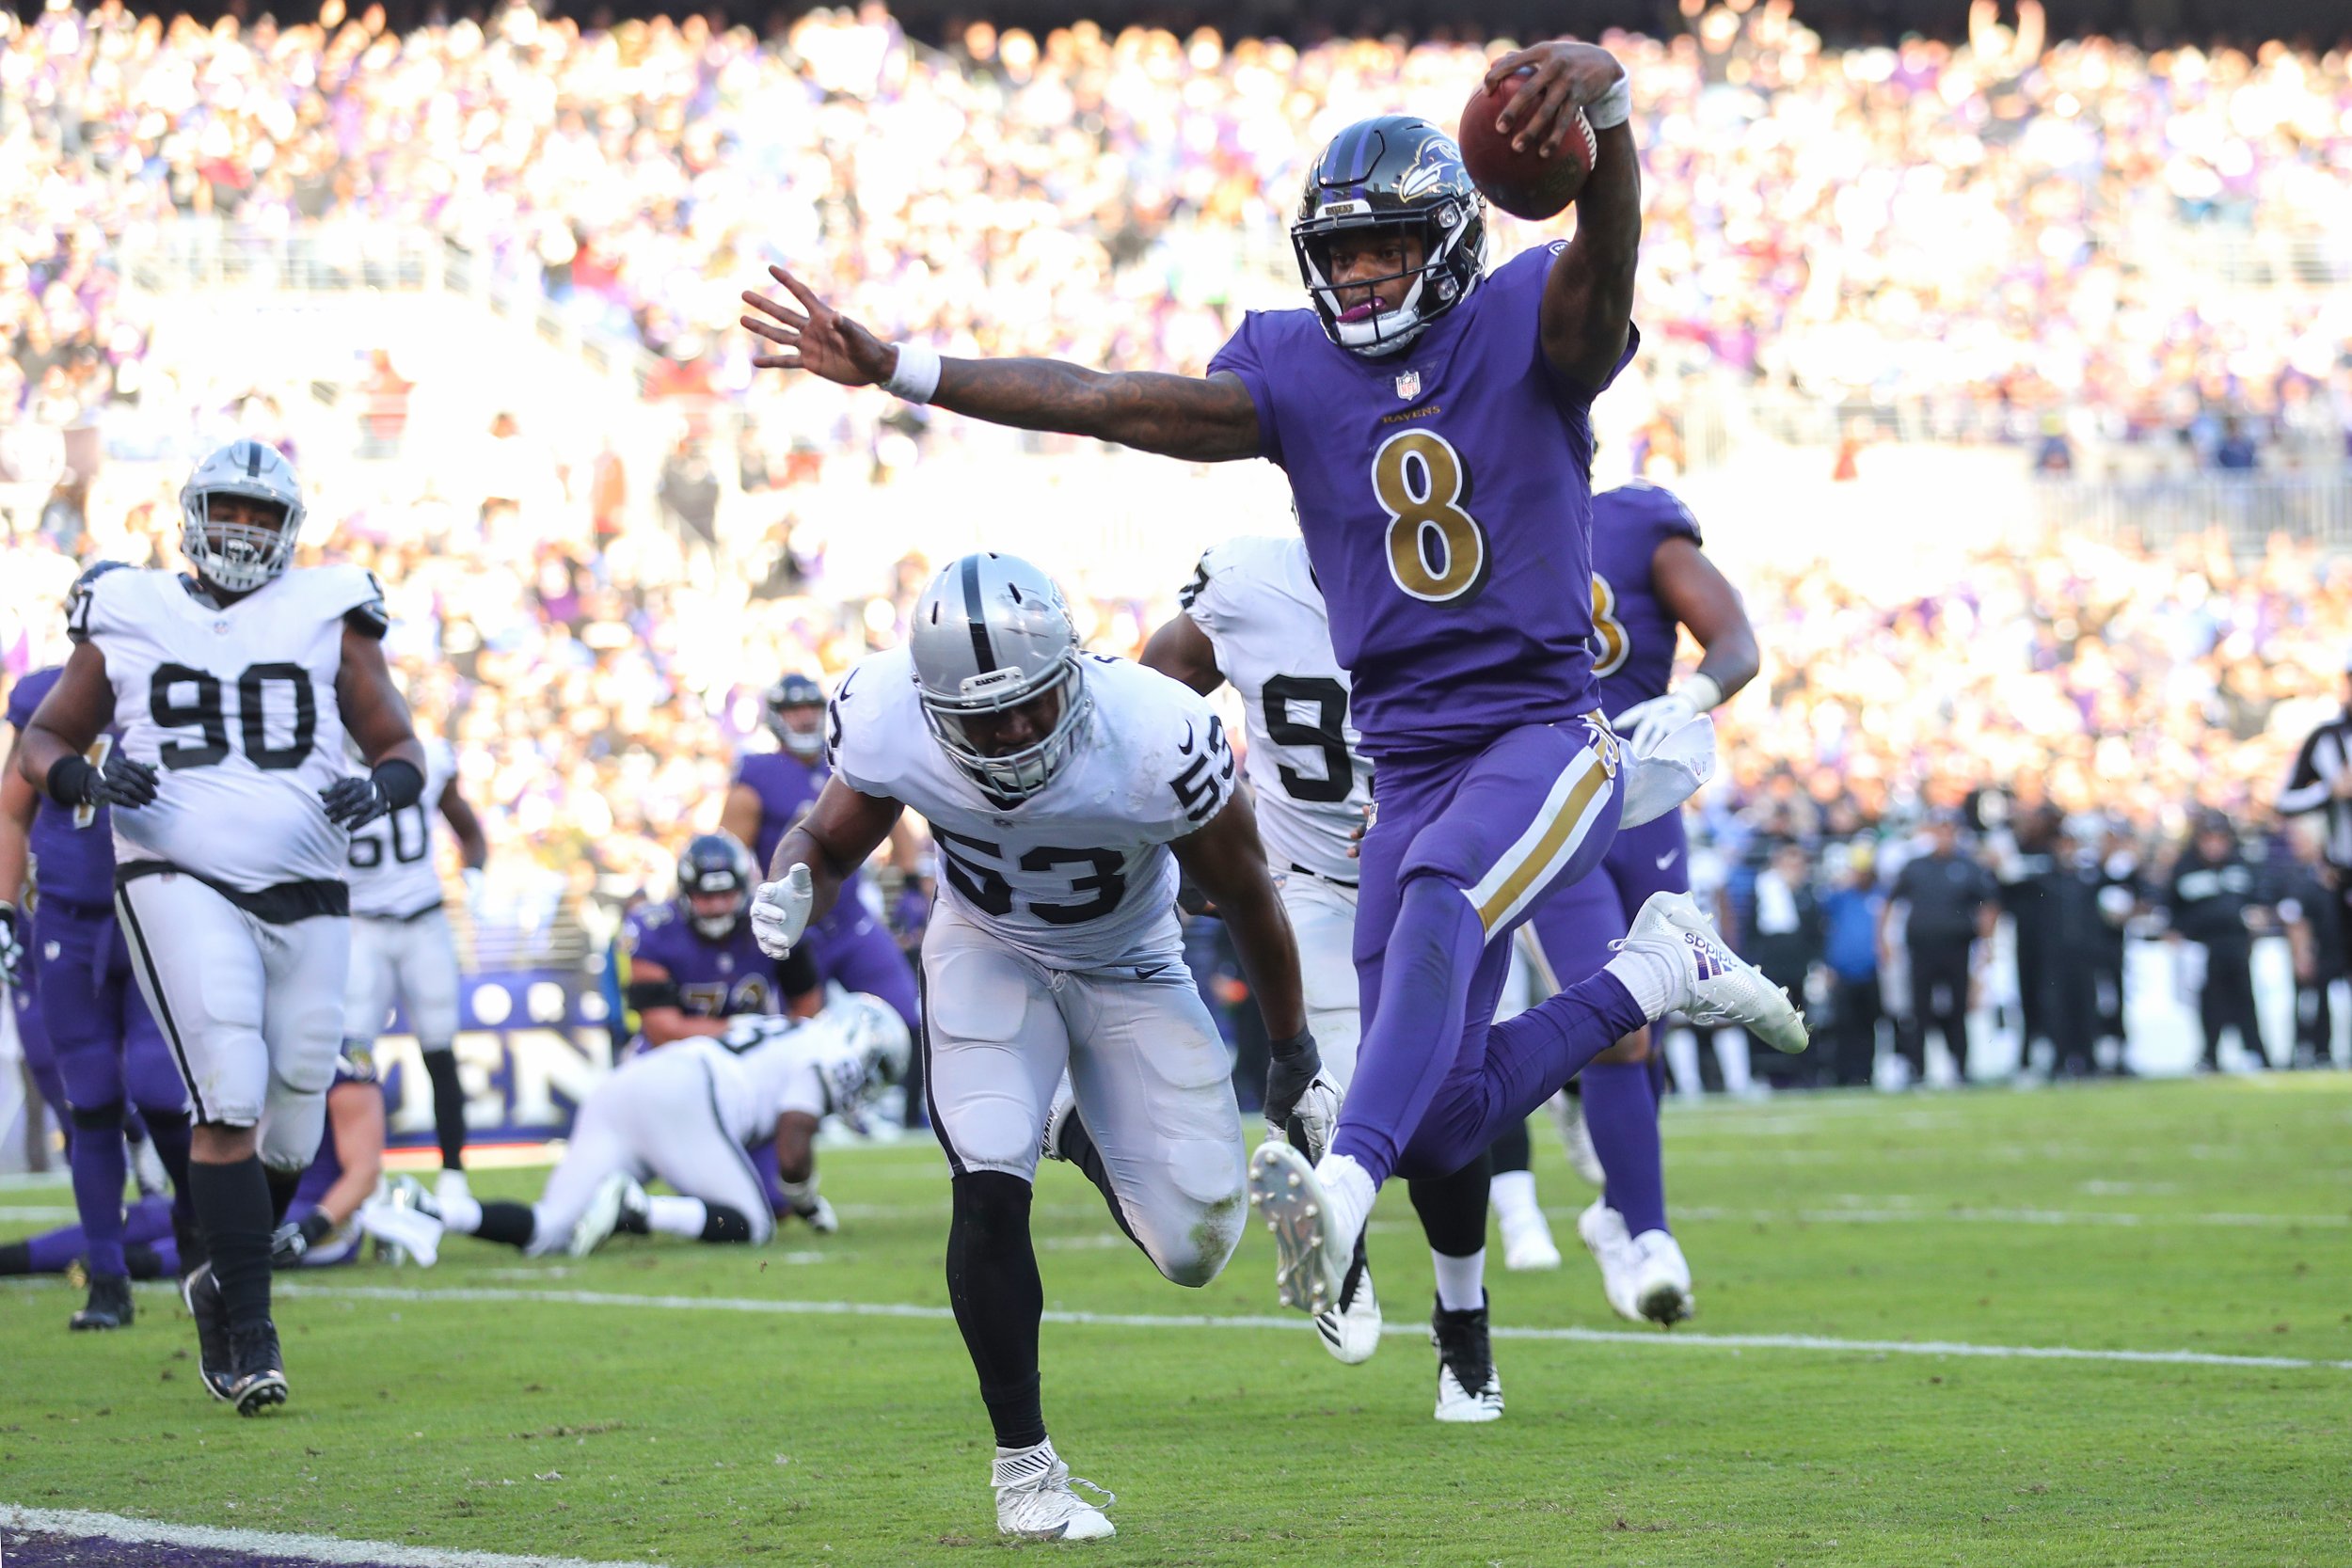 Michael Vick Lamar Jackson Should Proceed With Caution In Nfl